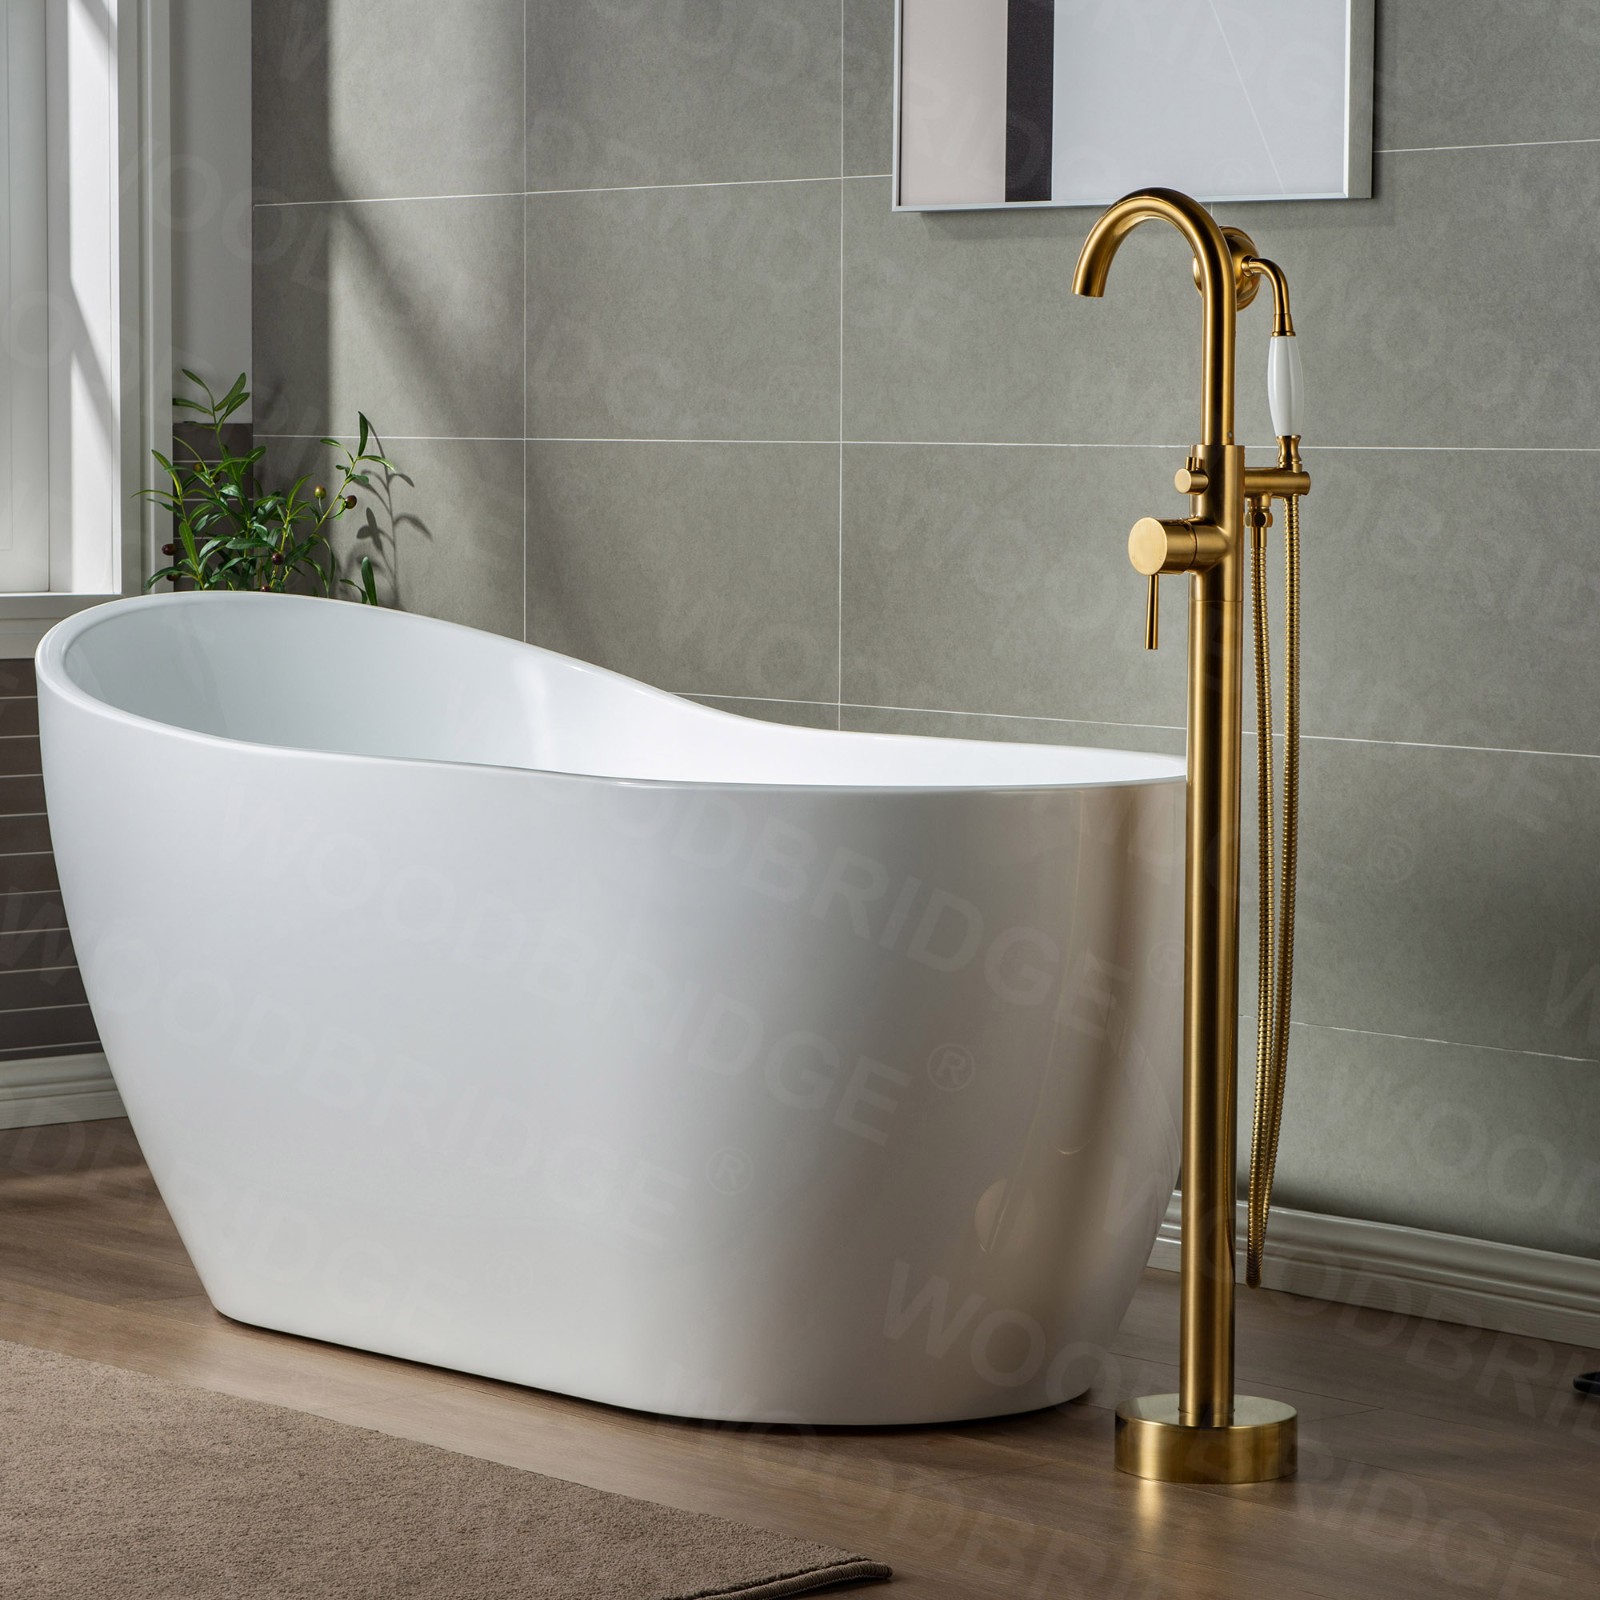  WOODBRIDGE F0007BGVT Fusion Single Handle Floor Mount Freestanding Tub Filler Faucet with Telephone Hand shower in Brushed Gold Finish._6132